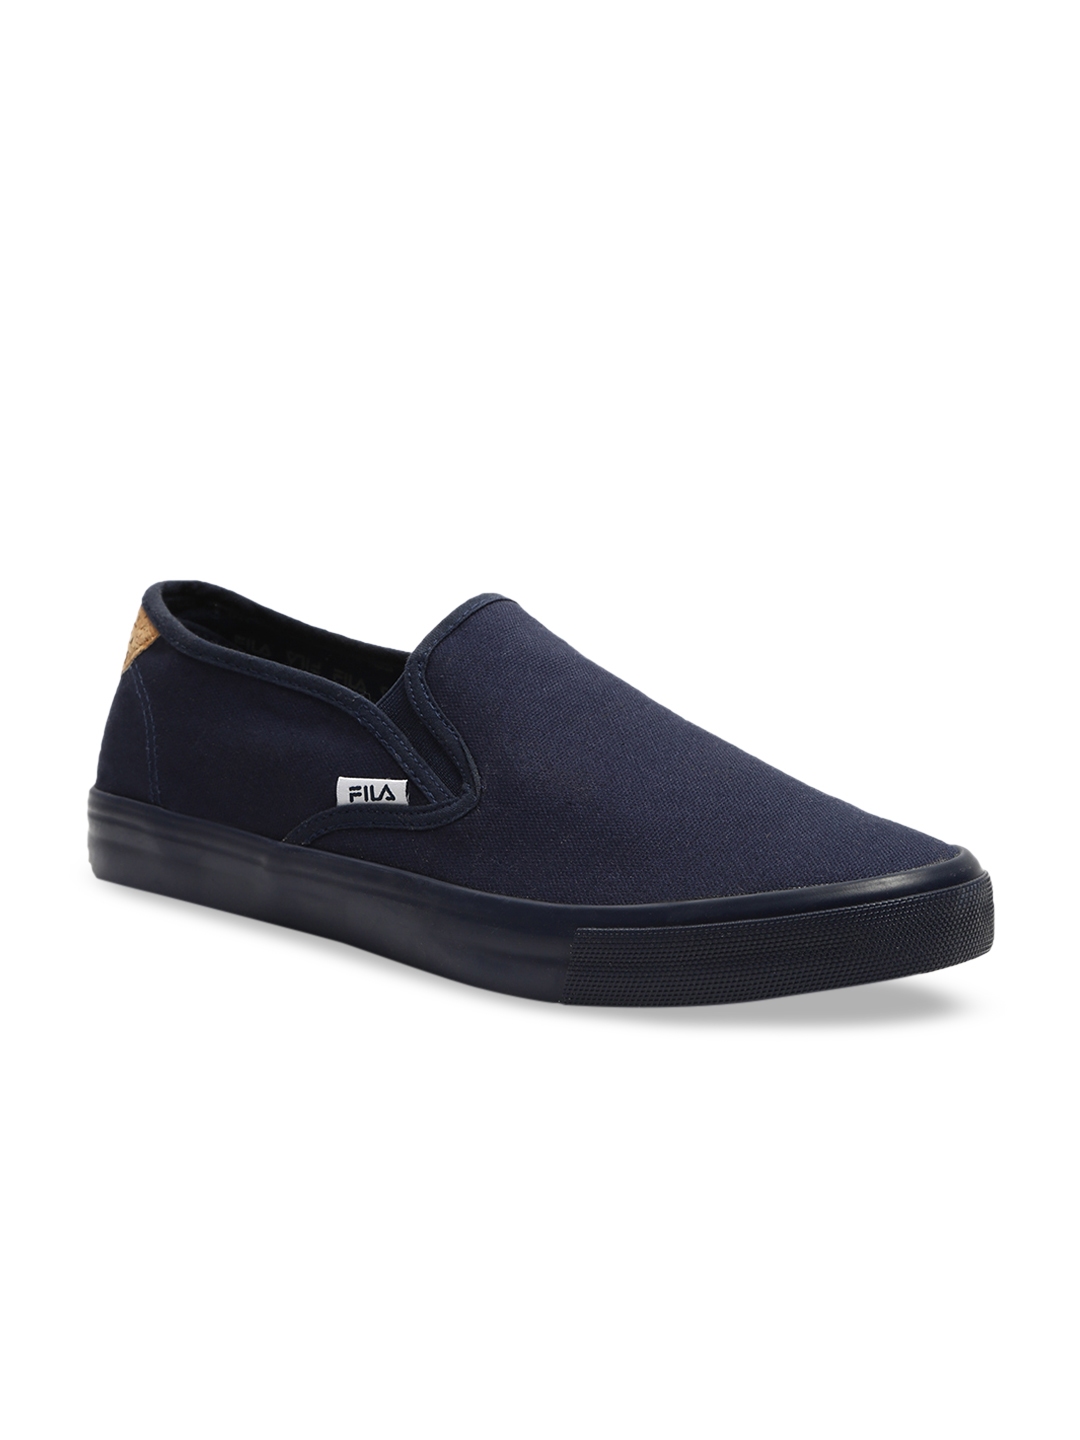 Buy FILA Unwind Unisex Navy Blue Slip On Sneakers - Casual Shoes for ...